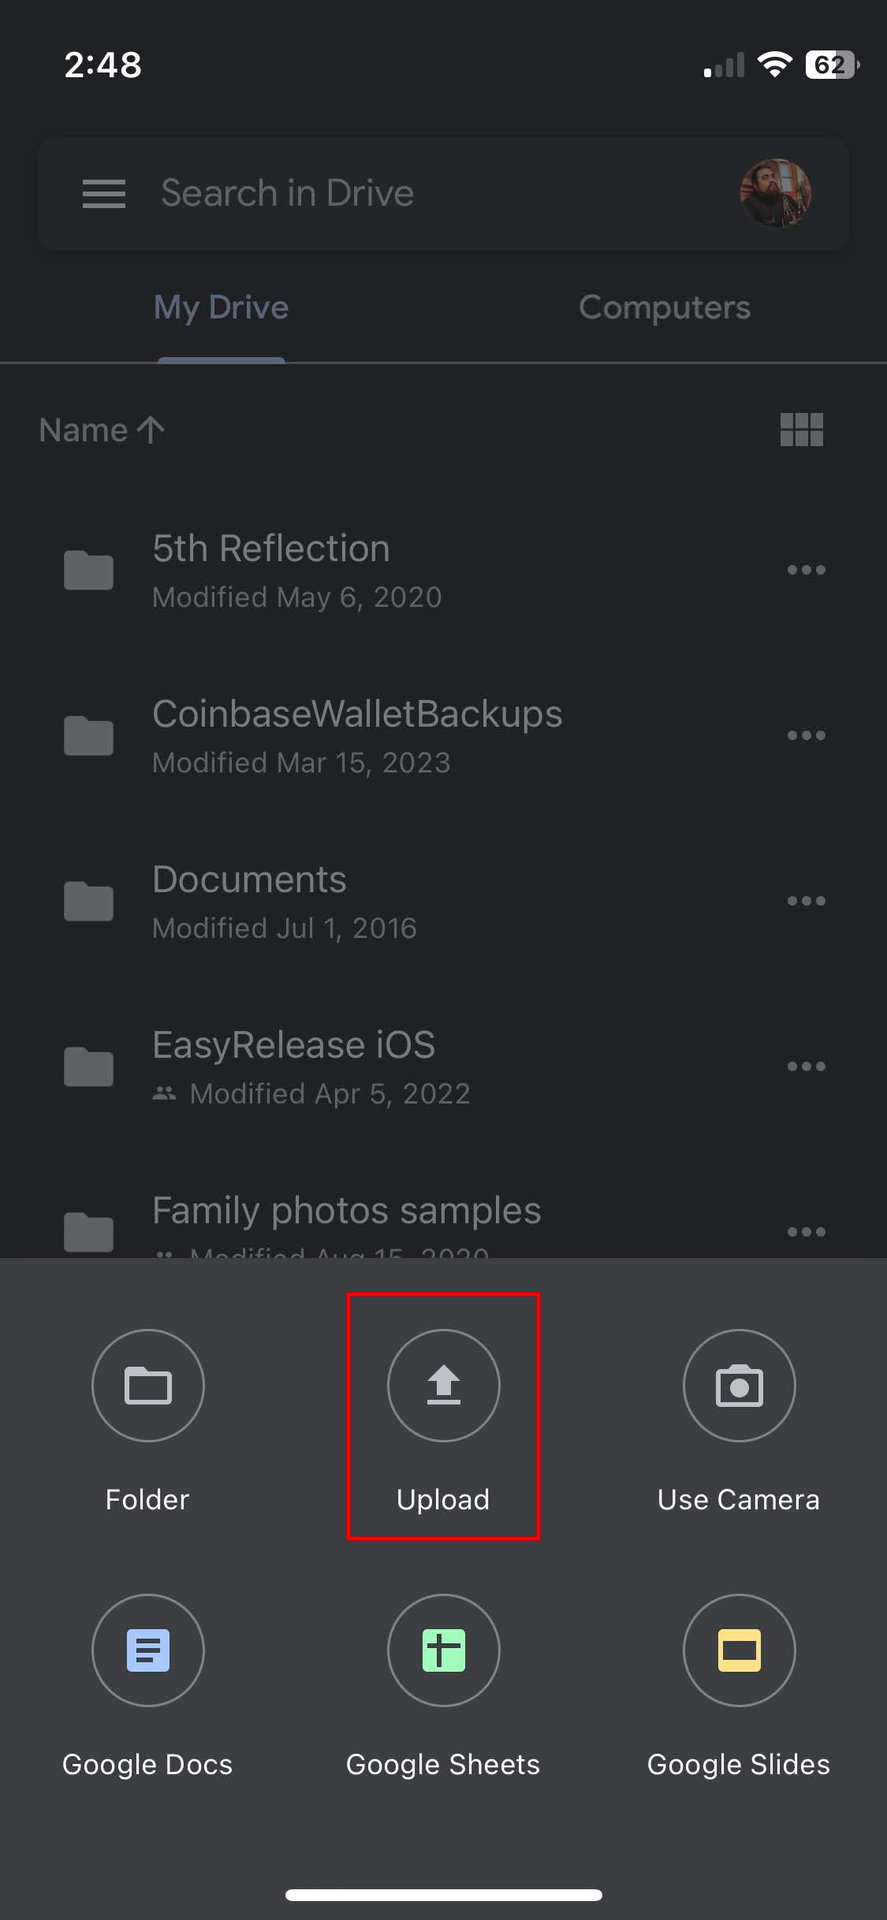 Transfer photos from iPhone to Android using Google Drive 2